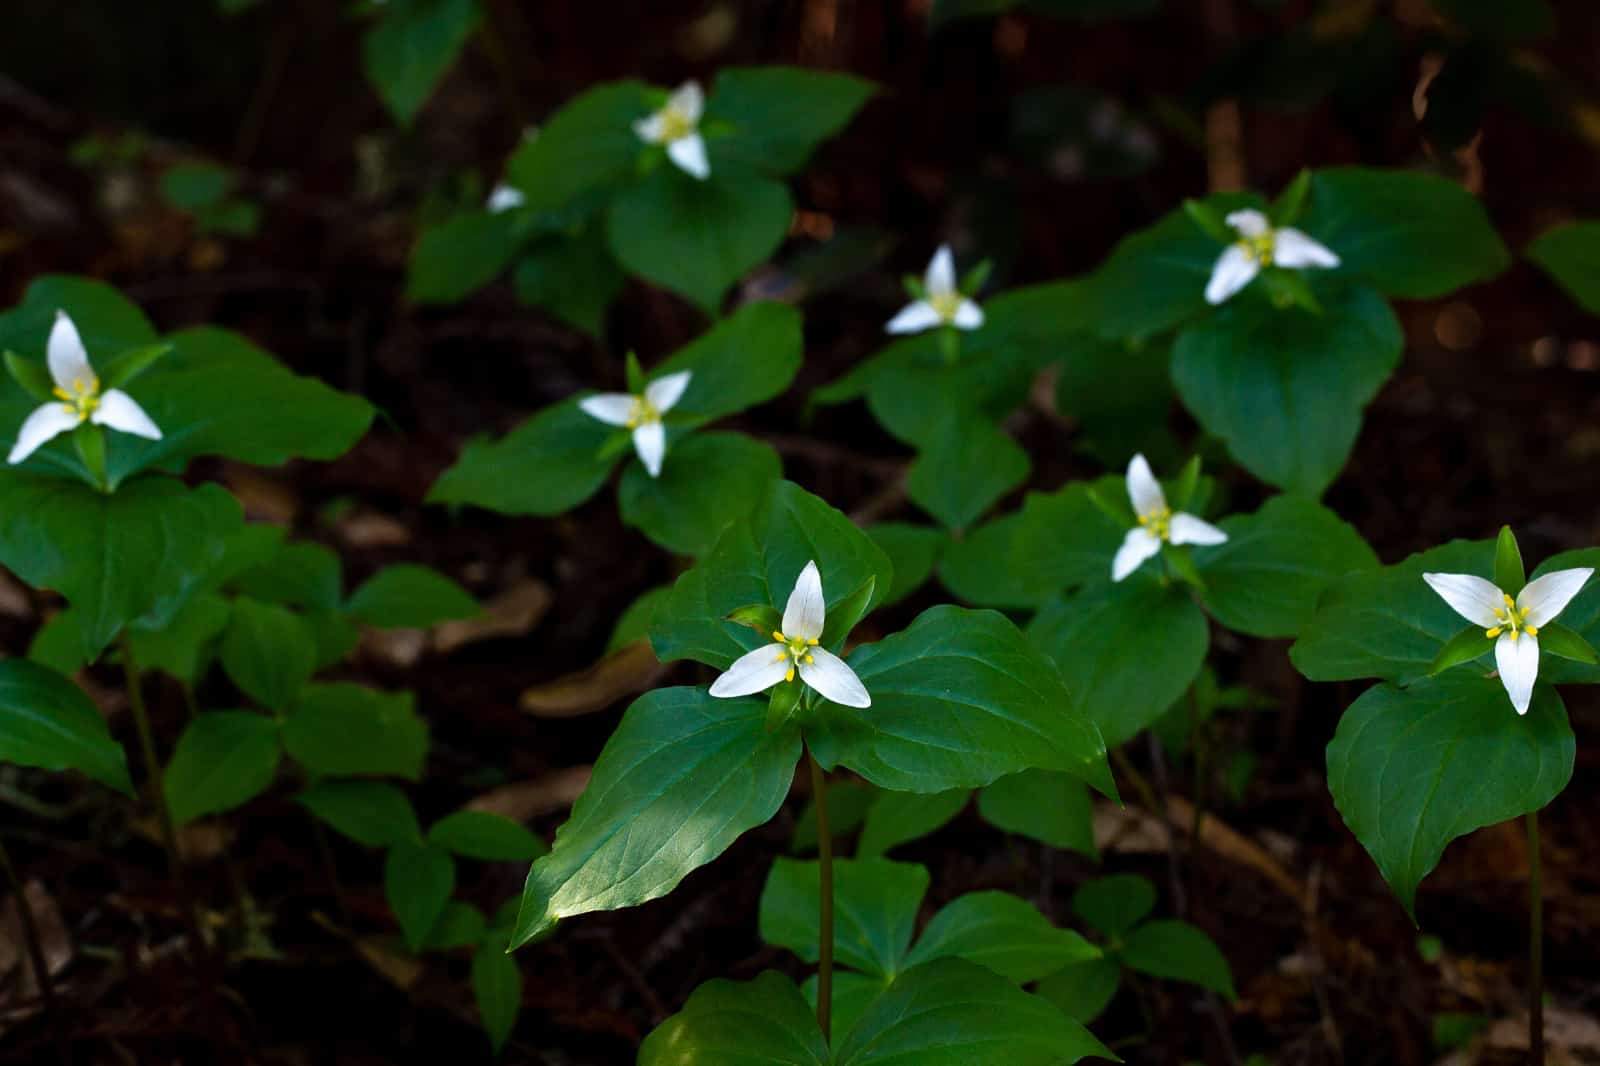 Green plants with white blooms